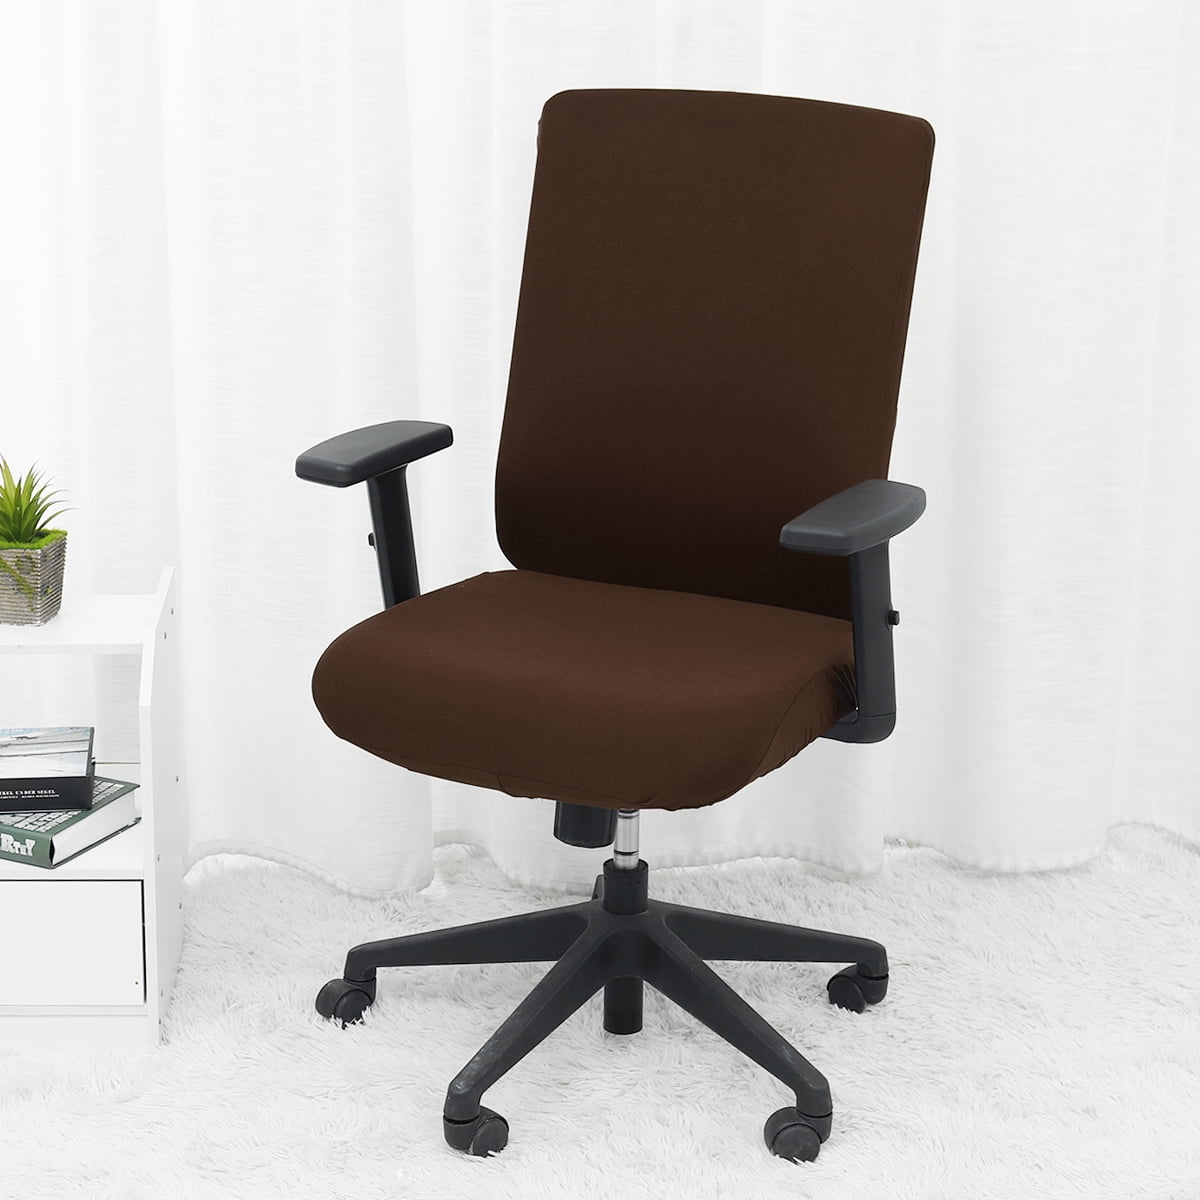 Details about   Office Chair Cover Spandex Stretch Swivel Rotate Armchair Protector Slipcover 